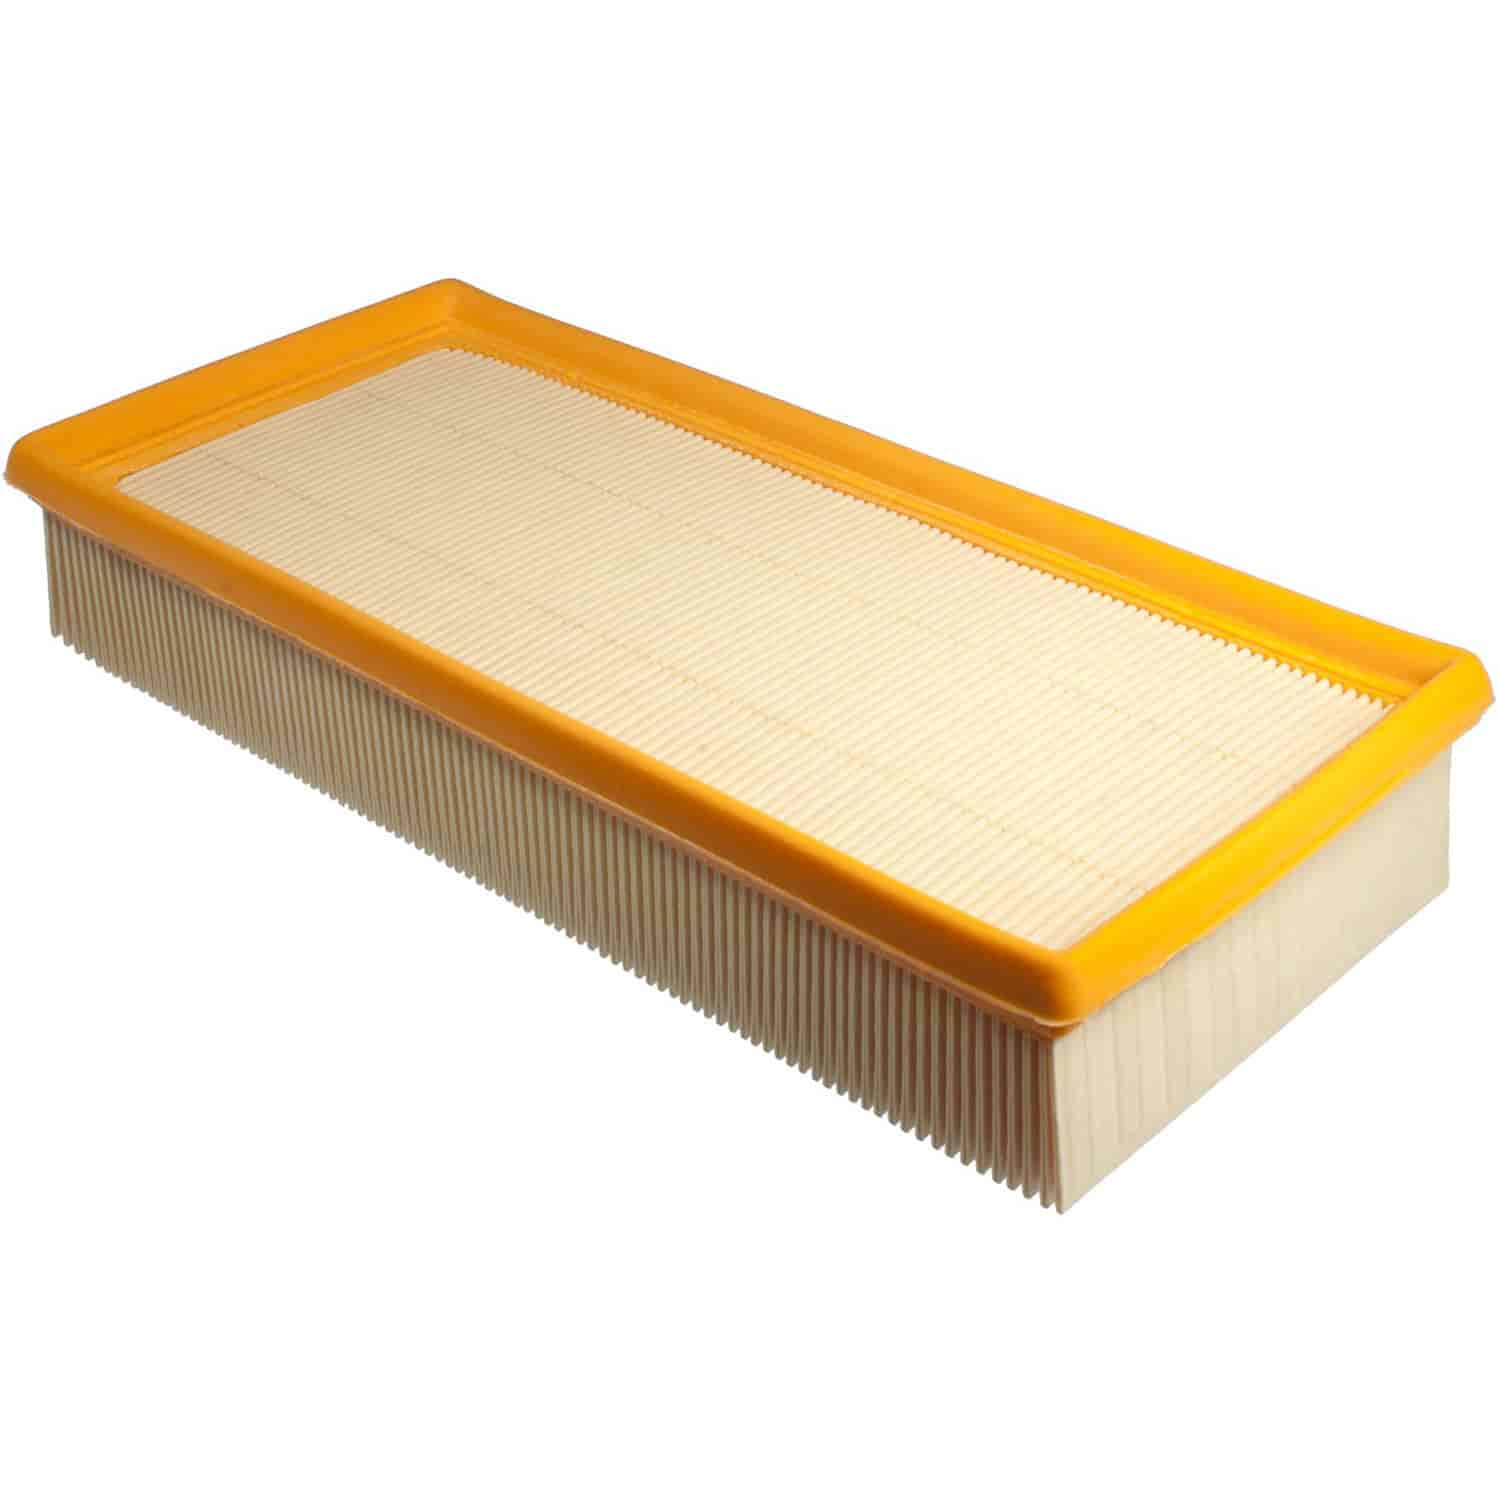 Mahle Air Filter Volvo 850 C70 S70 V70 2.3L and 2.4L 93-07